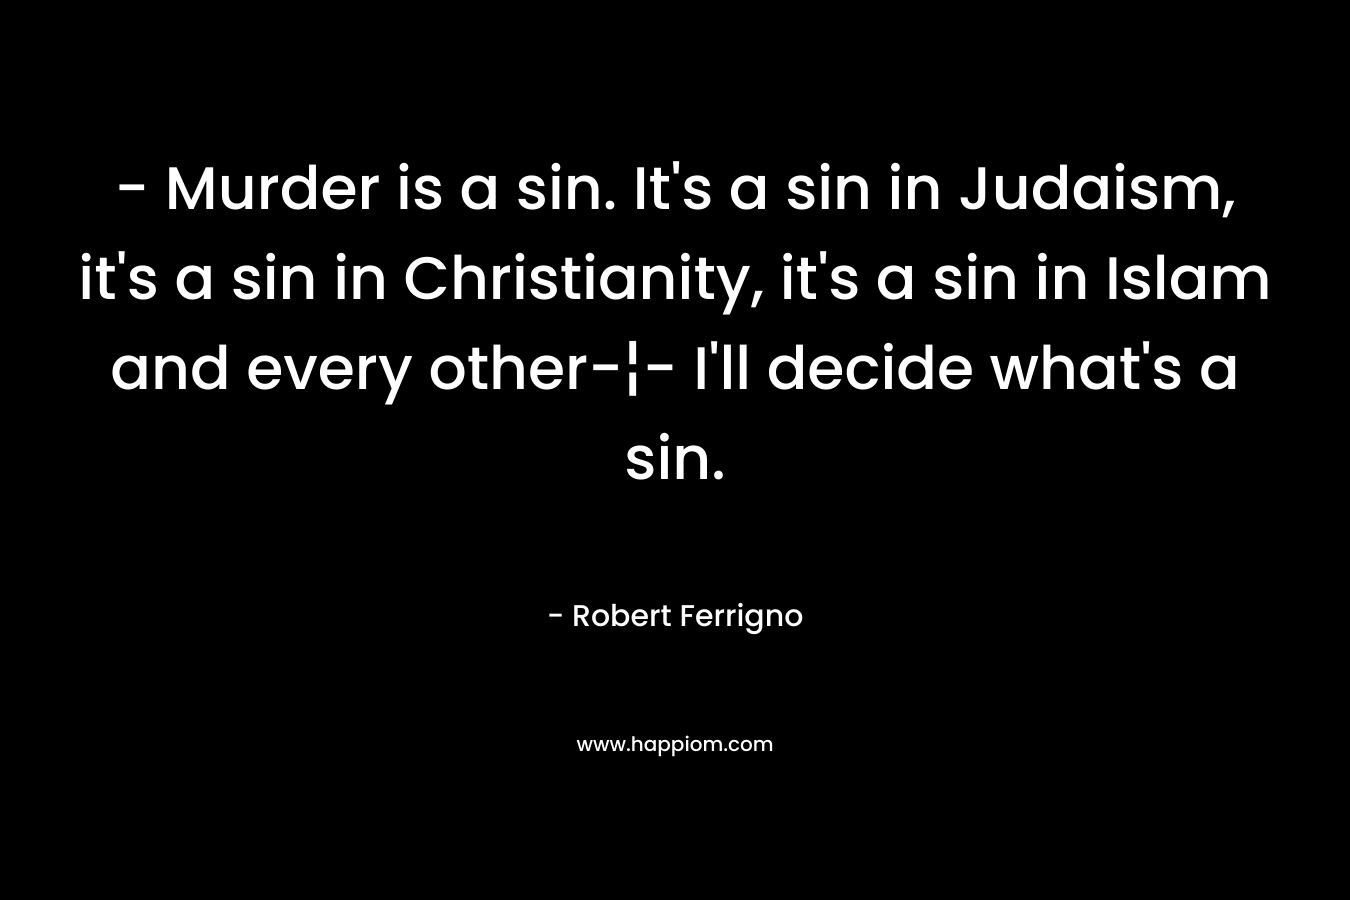 - Murder is a sin. It's a sin in Judaism, it's a sin in Christianity, it's a sin in Islam and every other-¦- I'll decide what's a sin.